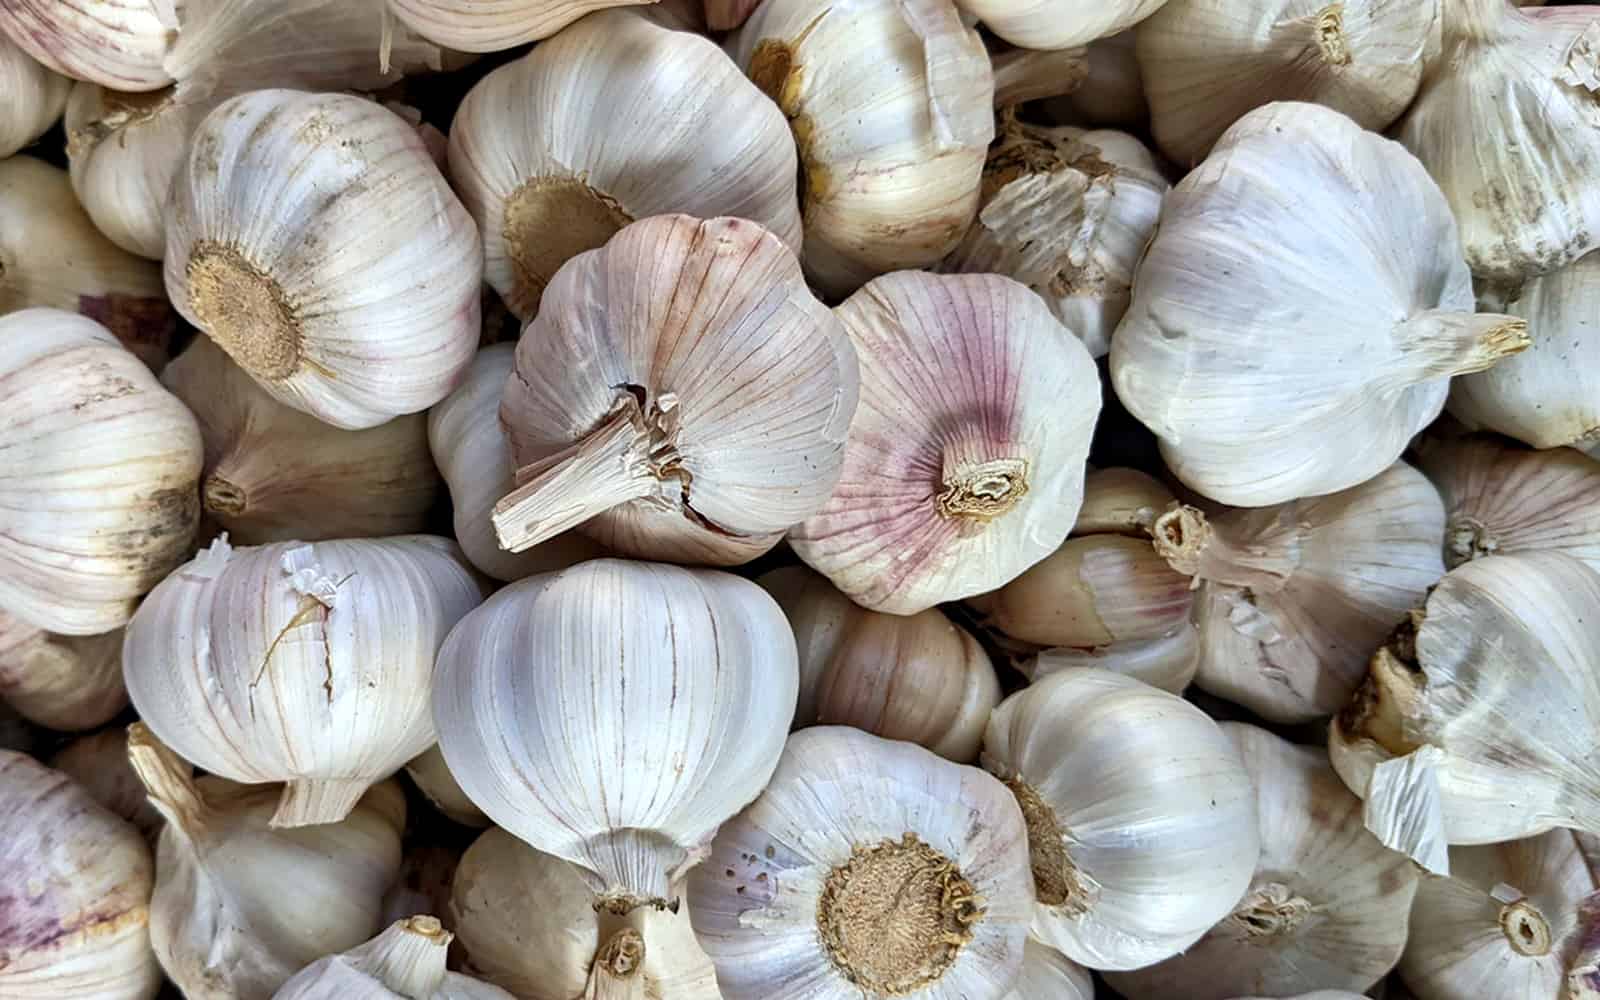 How to Know When to Harvest Garlic